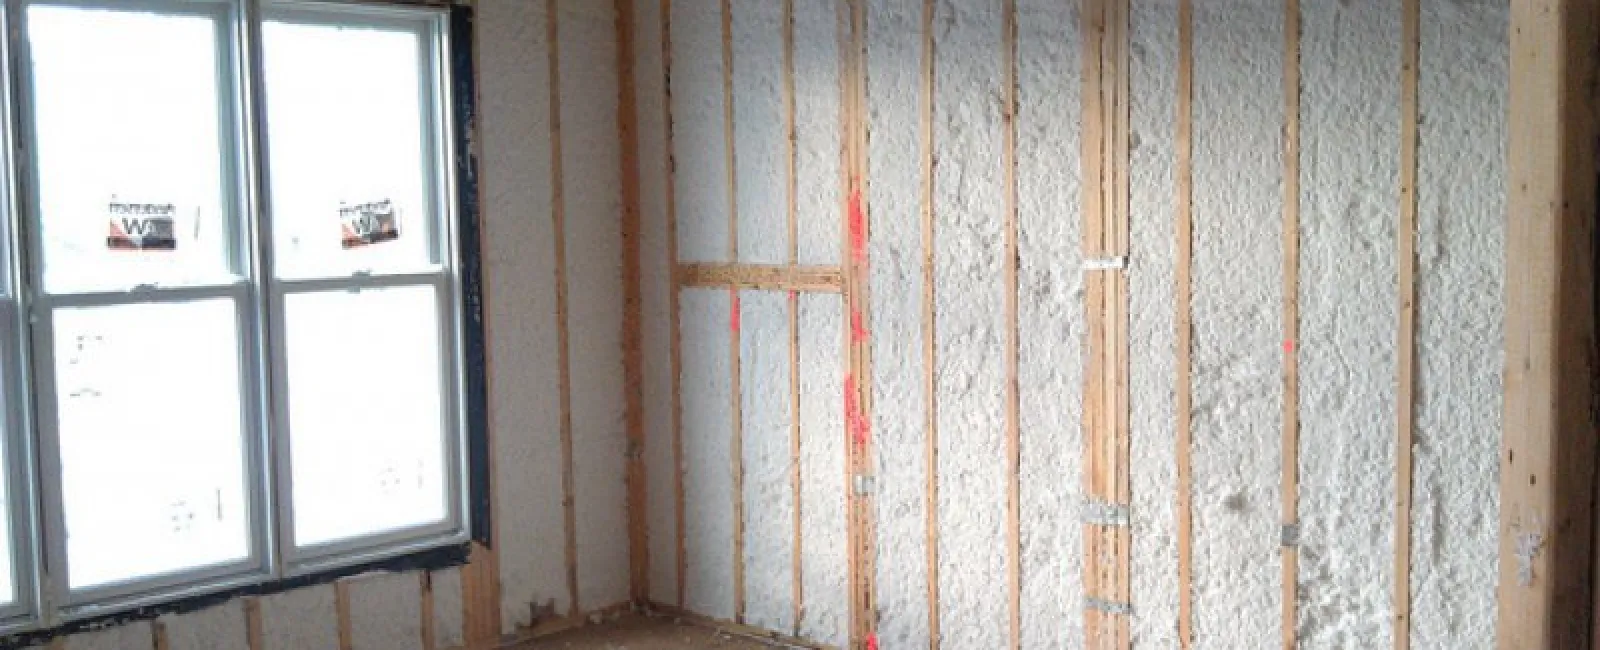 3 Reasons to Upgrade Insulation in Your House